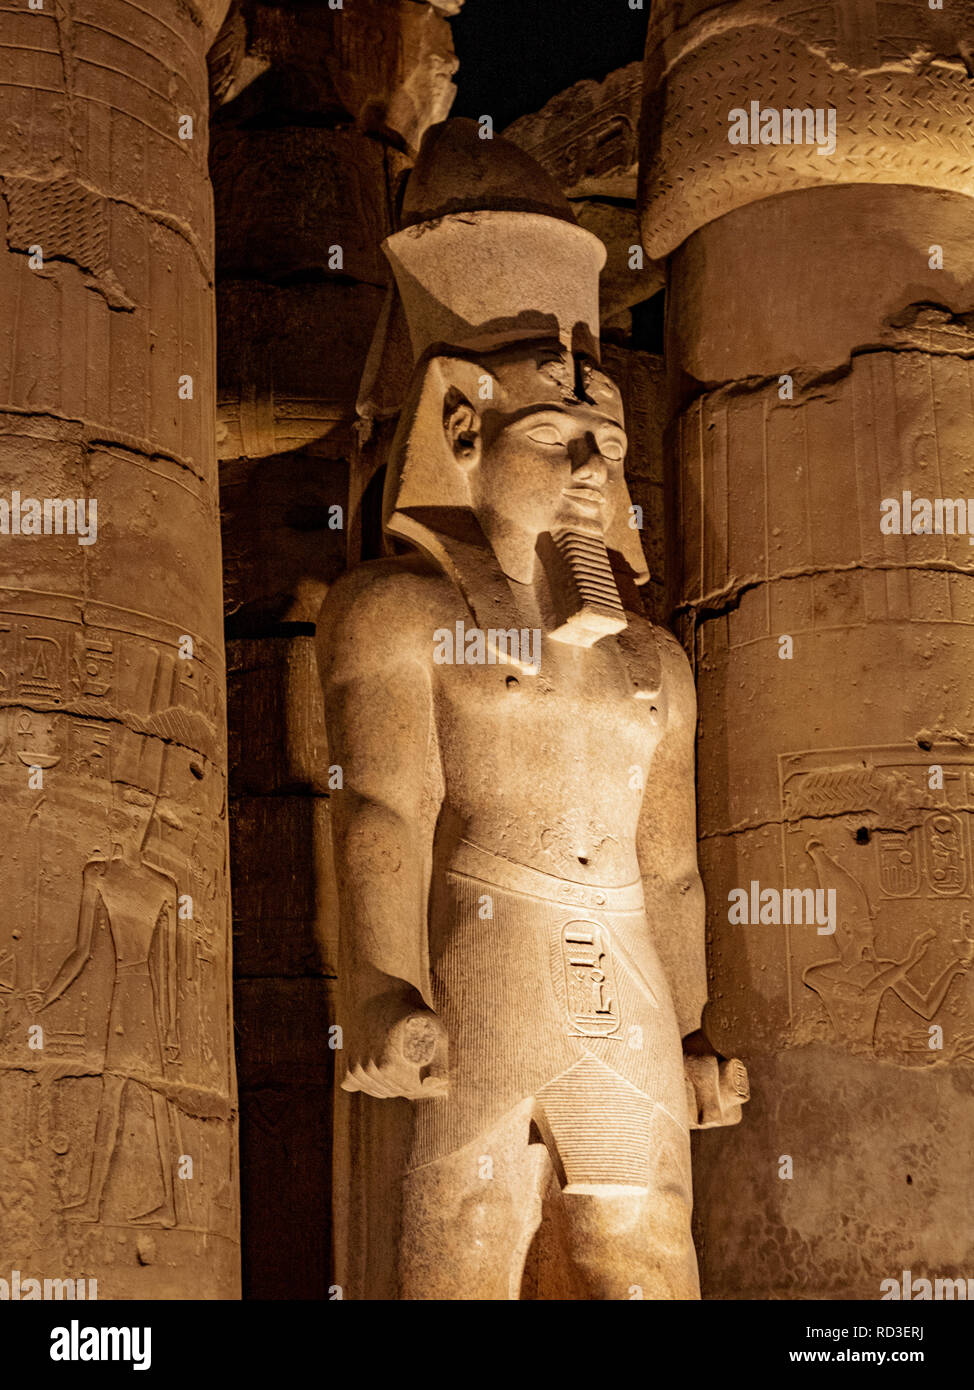 The statue of King Ramses II or Ramses the Great in Luxor Temple Egypt Stock Photo